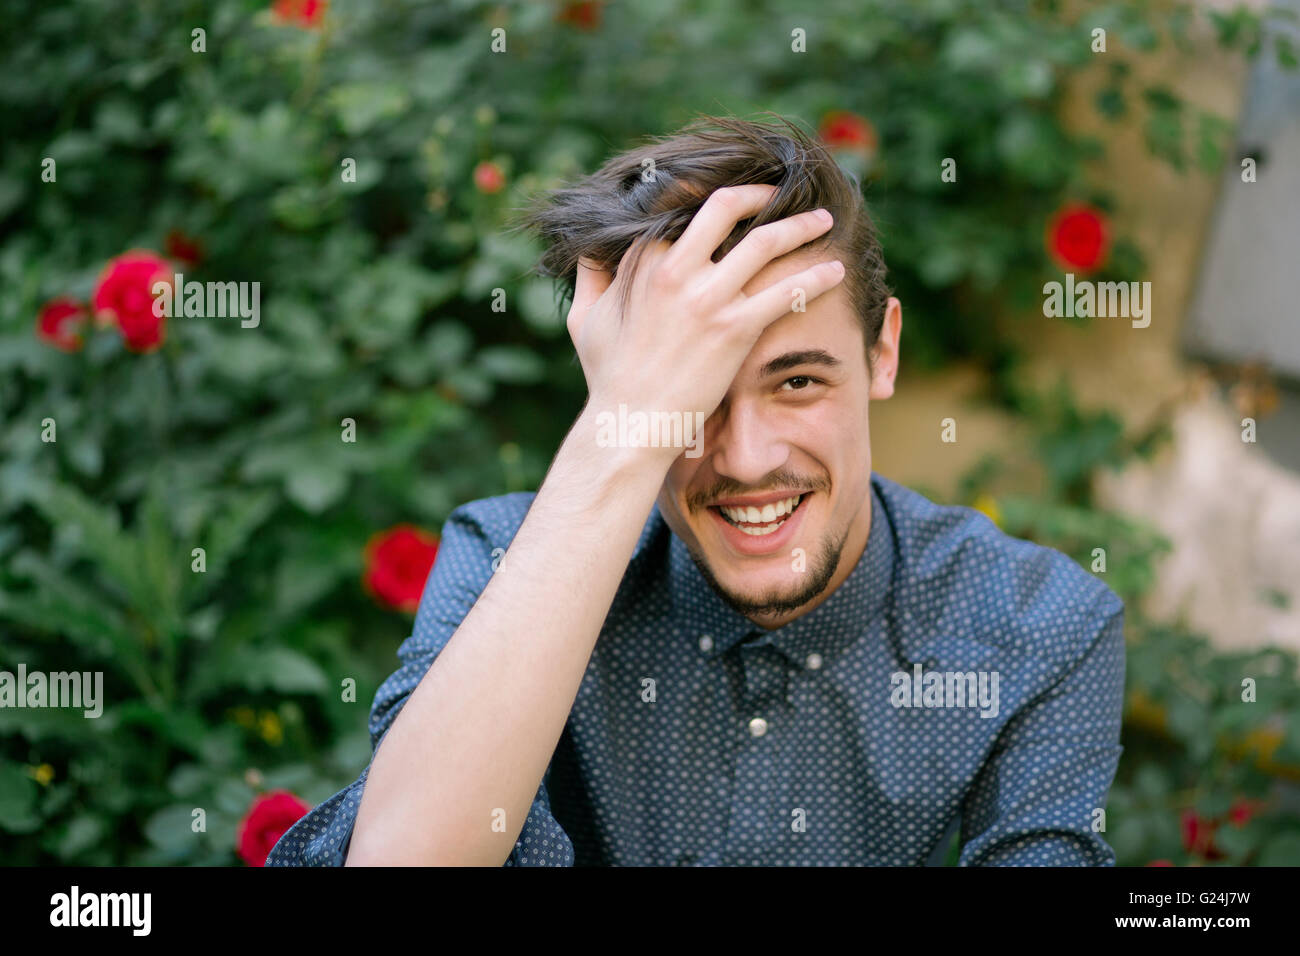 Portrait of a young man smiling Stock Photo